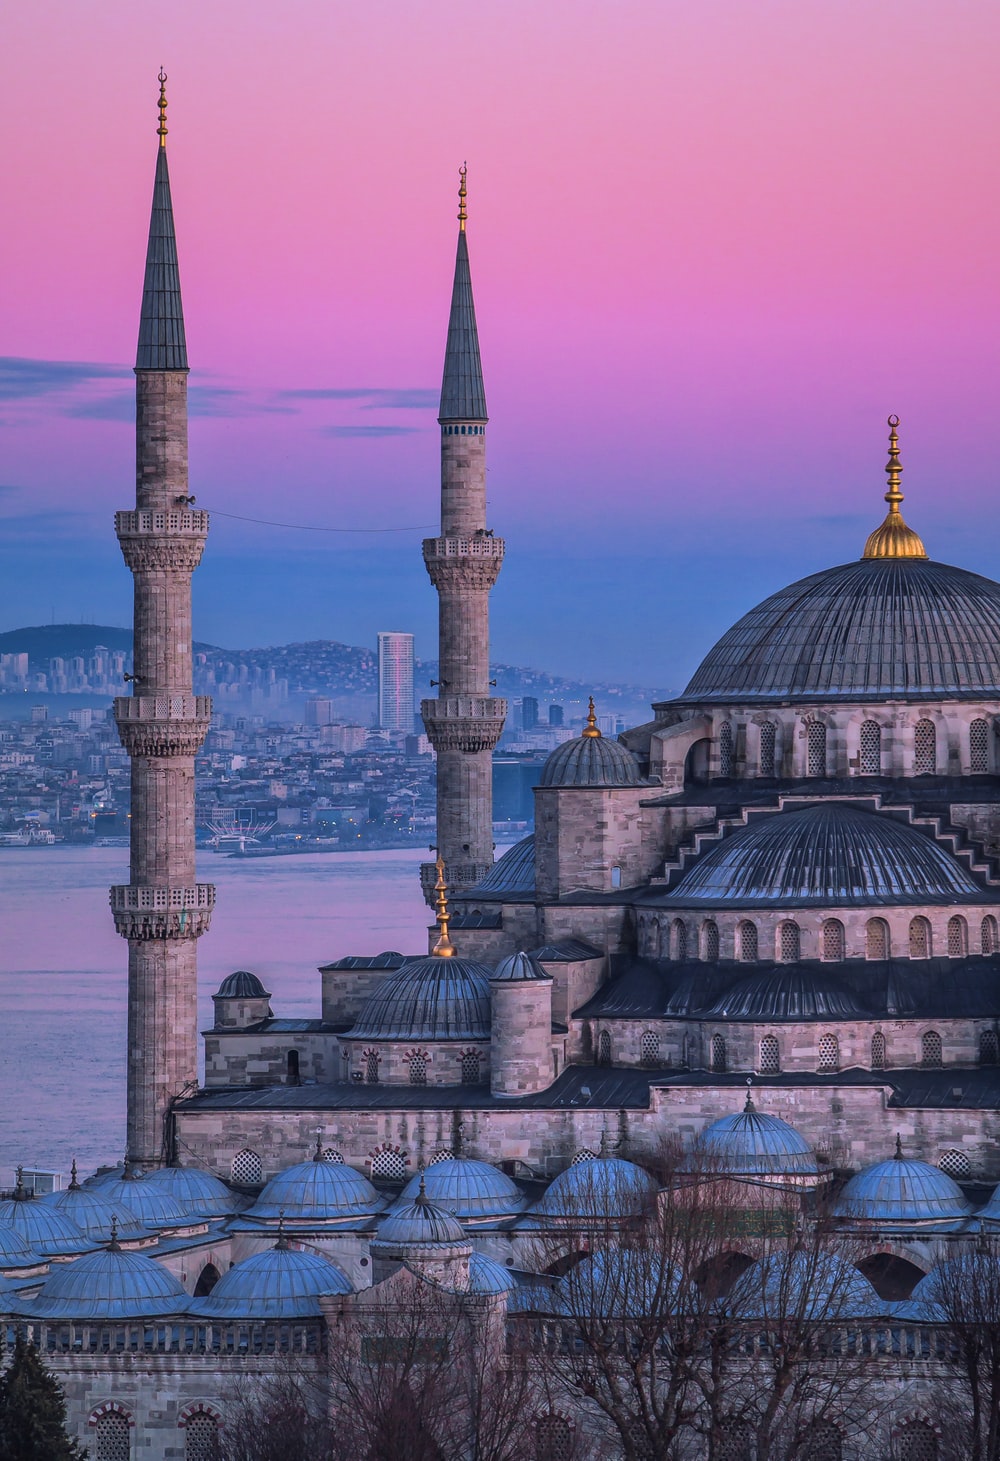 Turkey Pictures Scenic Travel Photos Image On